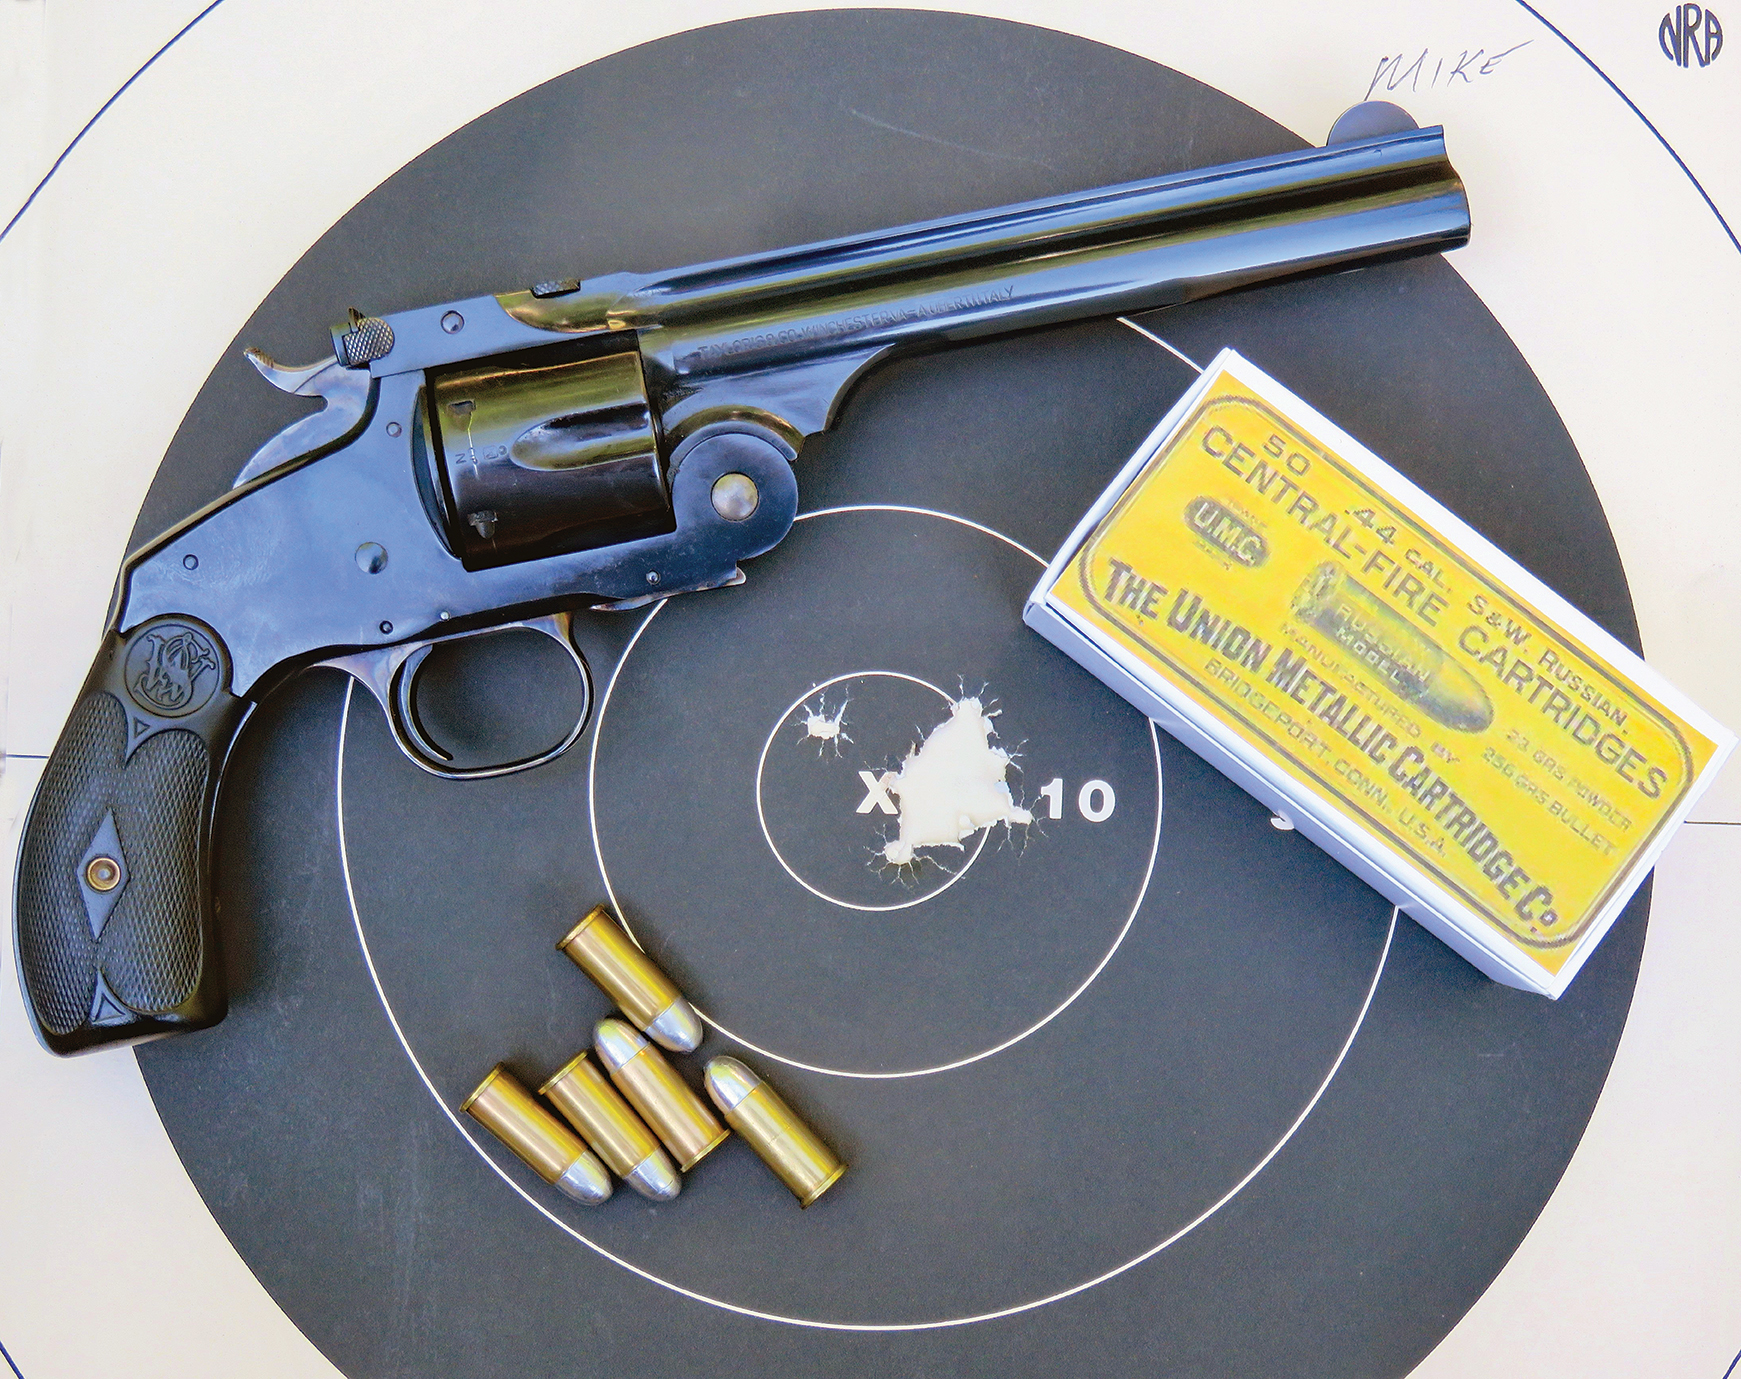 The .44 and outfit is shown with one of the practice targets.